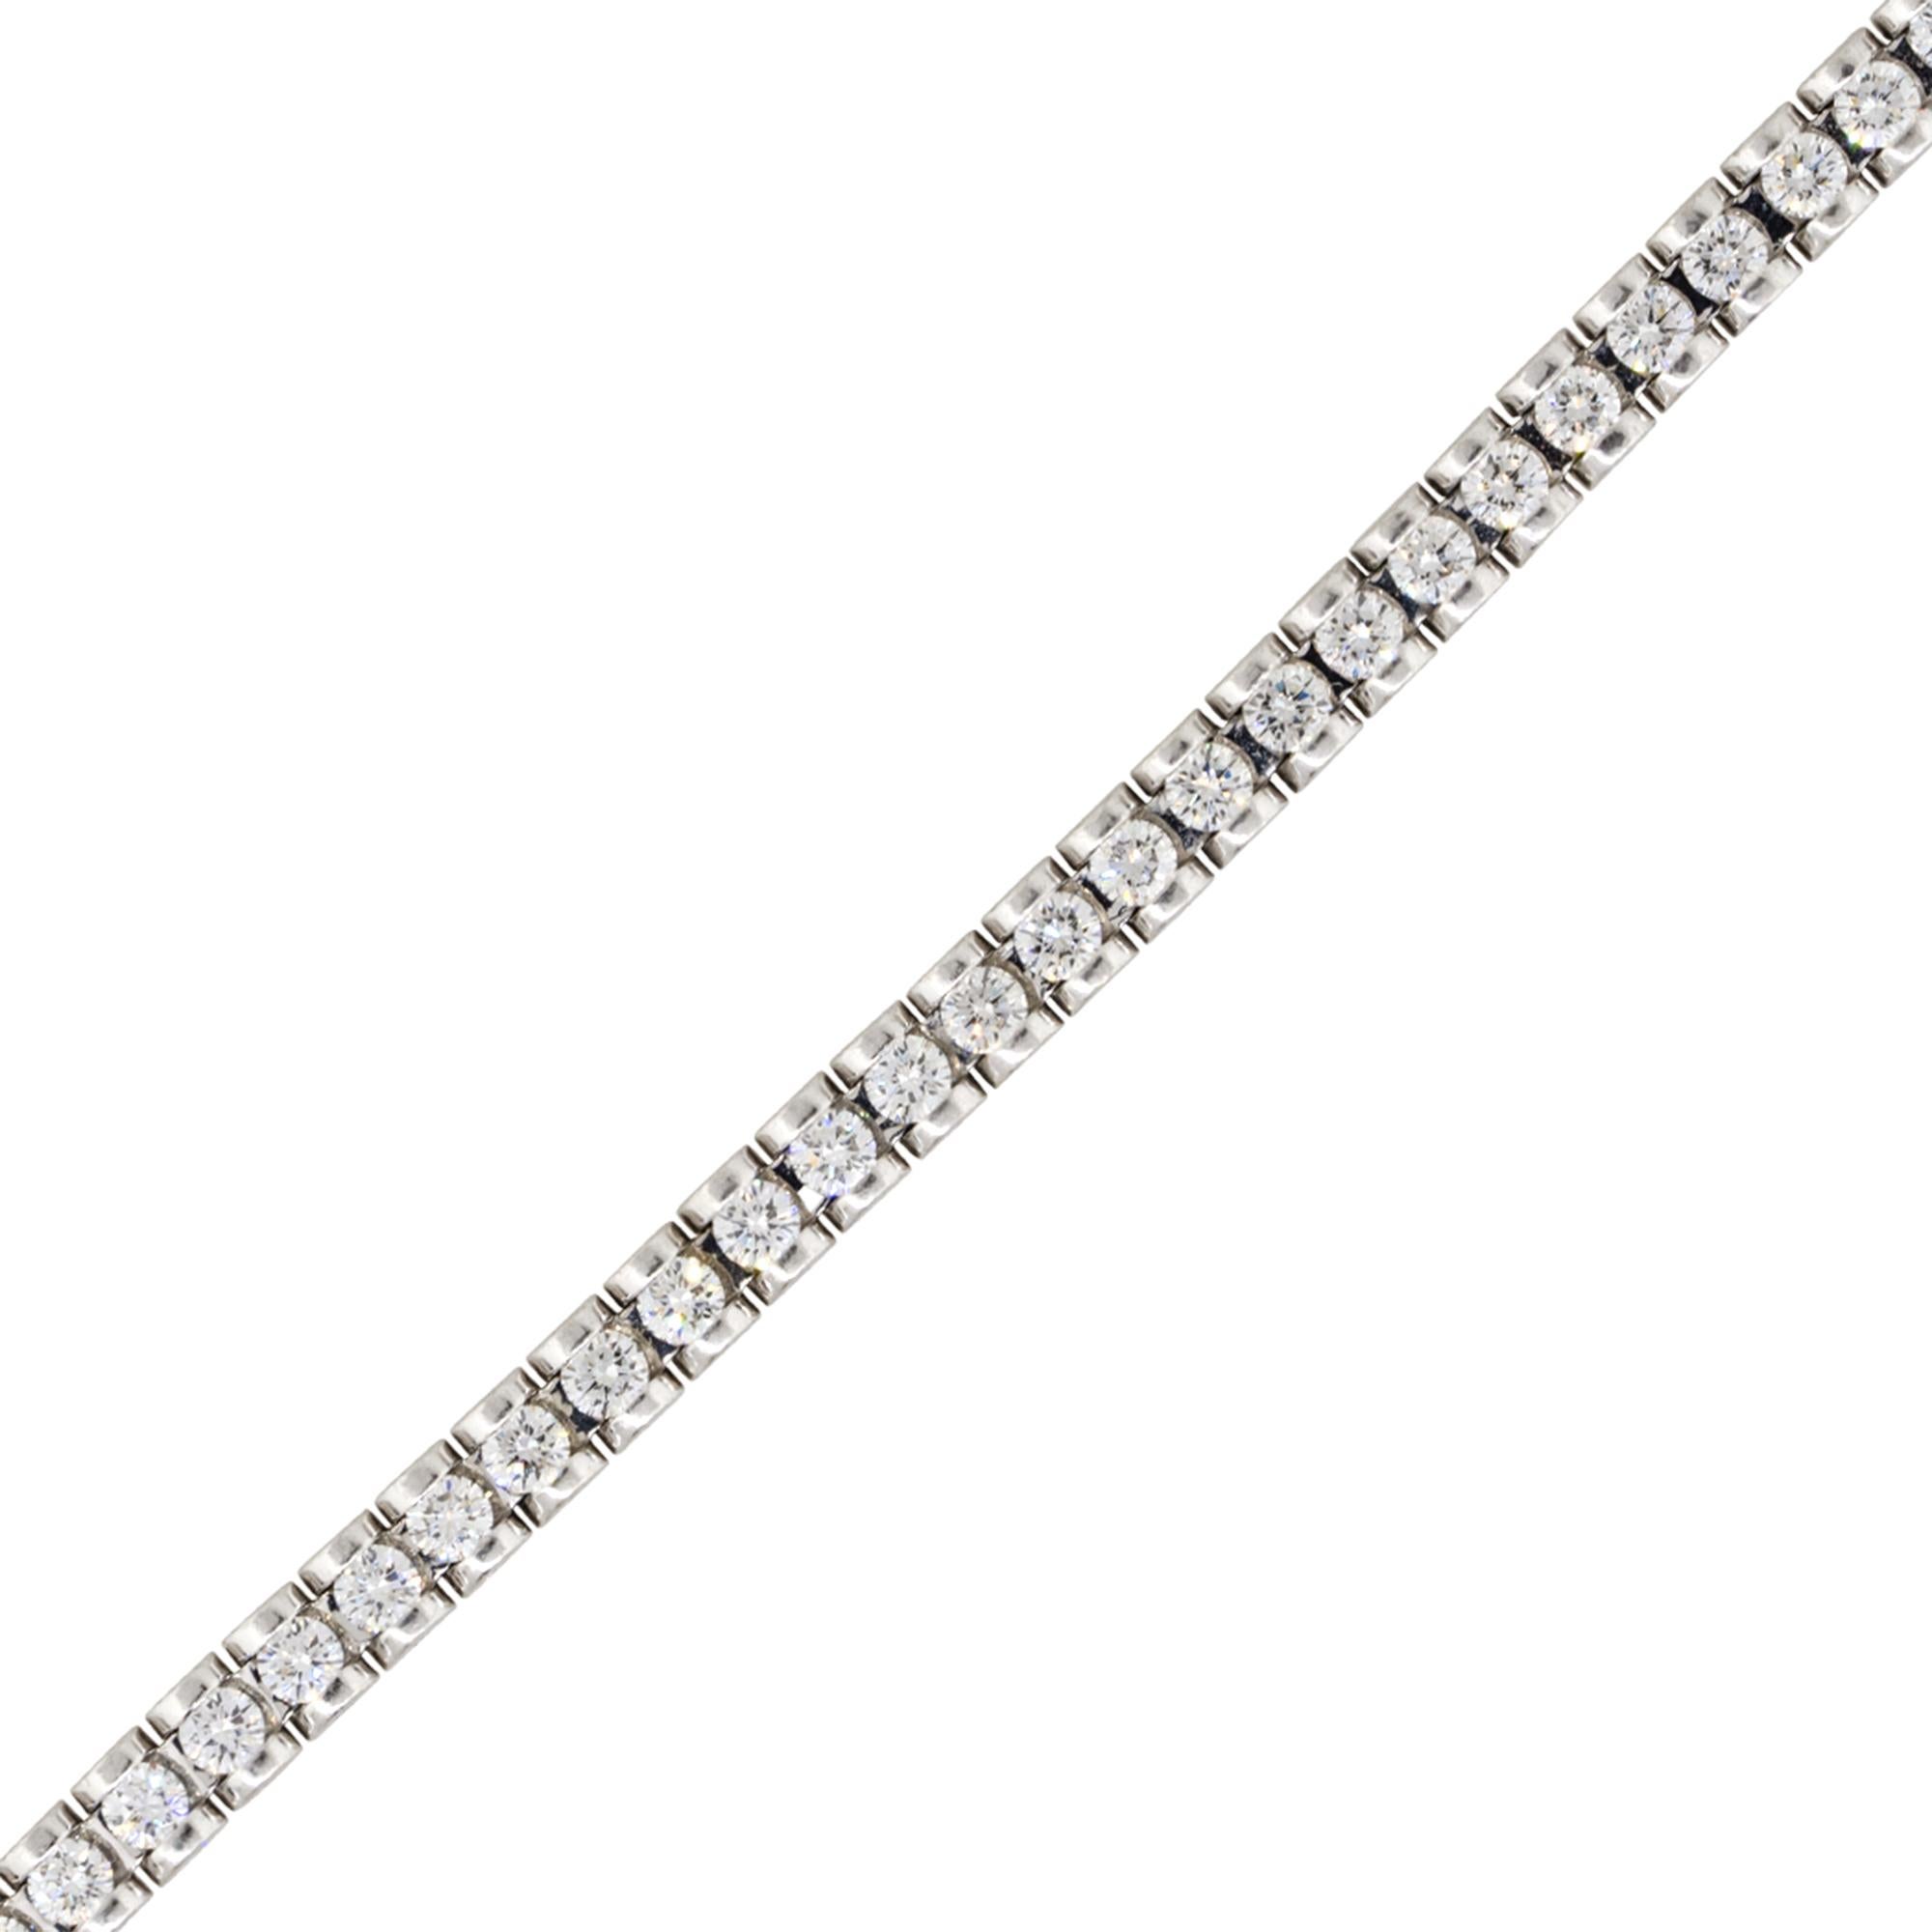 Material: Platinum White Gold
Diamond Details: Approx. 7ctw round brilliant diamonds. Diamonds are G/H in color and SI in clarity.
Clasps: Tongue in box clasp with safety latch
Total Weight: 43.8g (28.1dwt) 
Length: 7.25